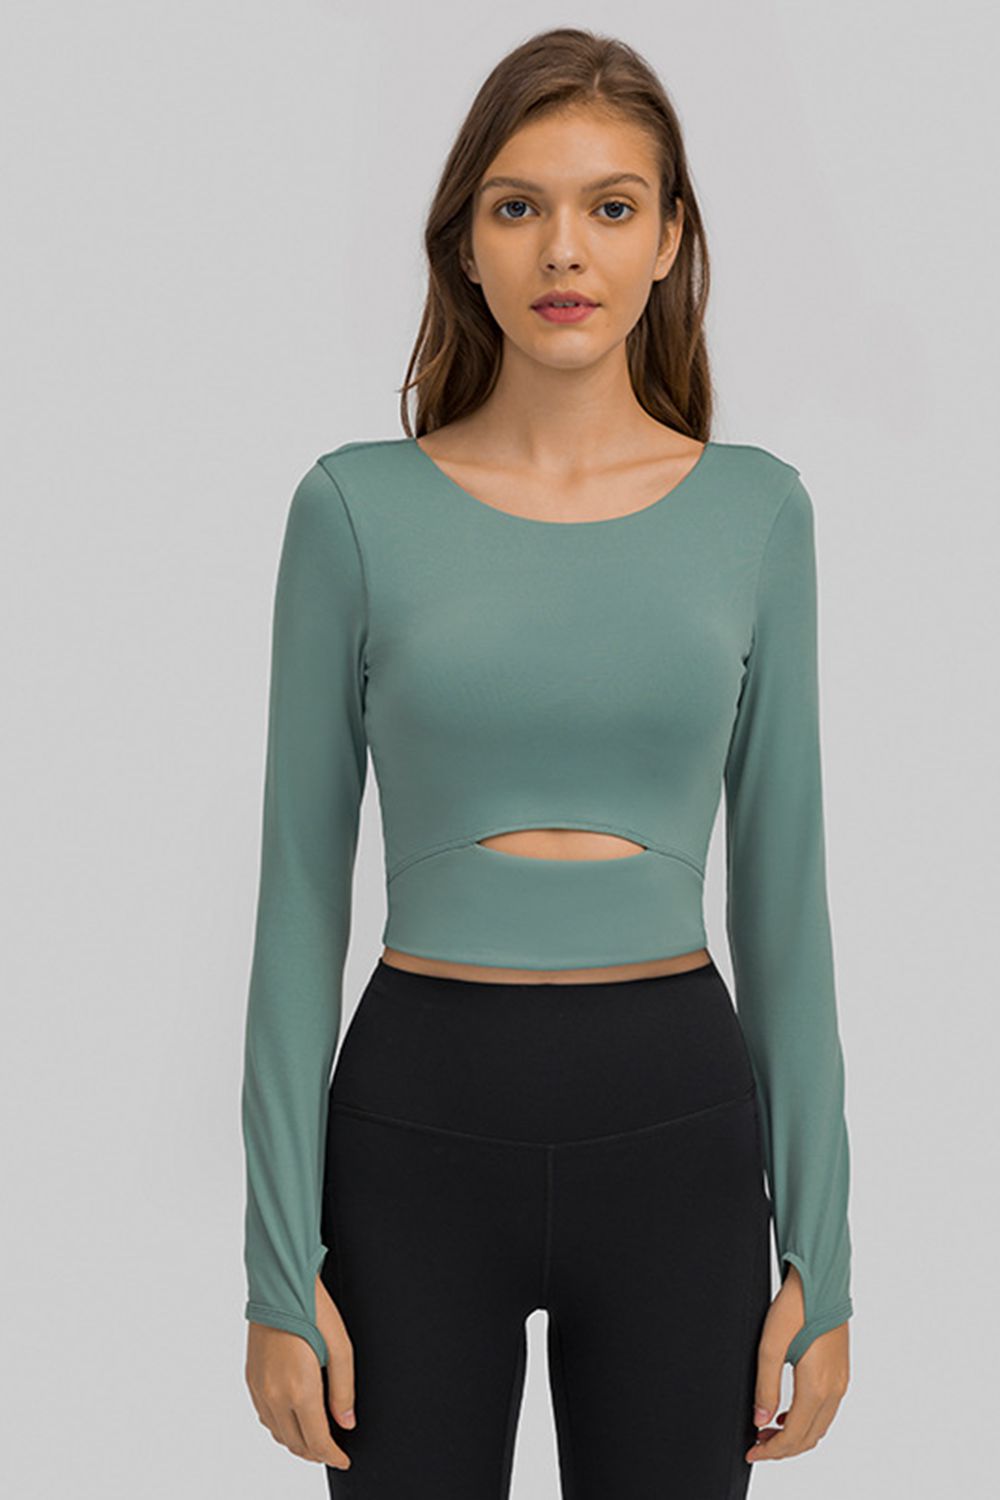 Women’s Cut Out Front Crop Yoga Tee